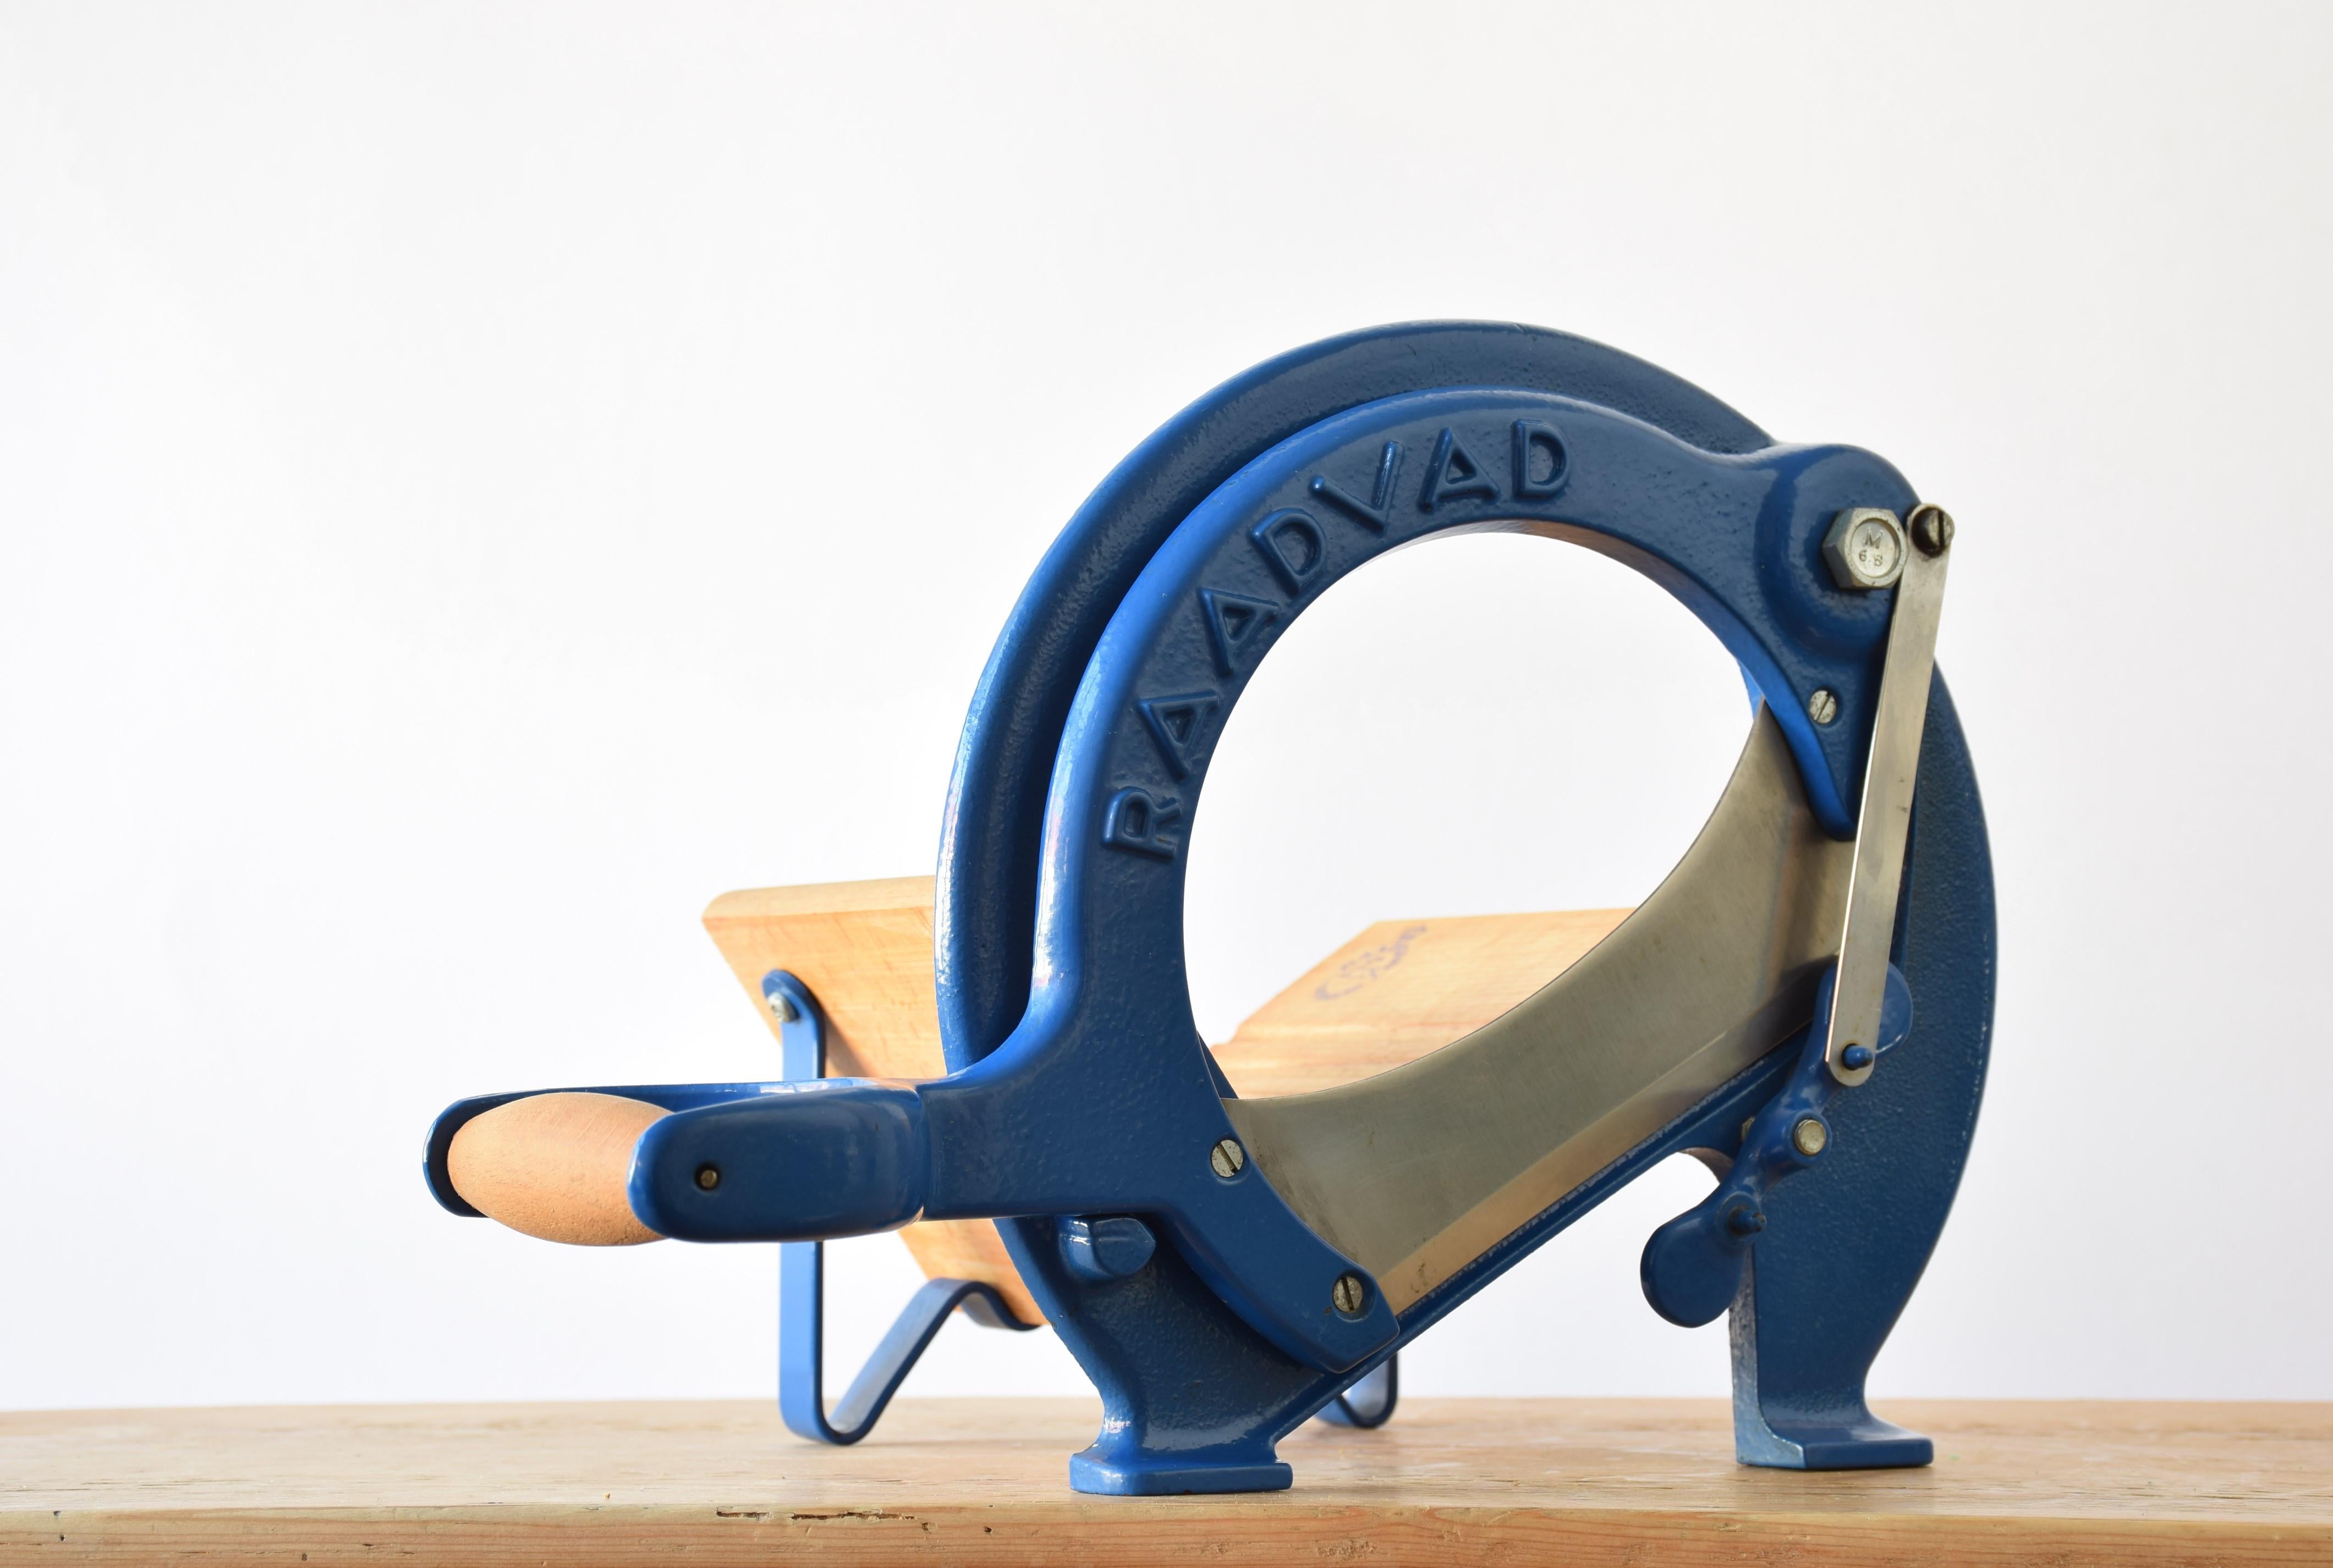 This iconic Danish bread slicer was produced by Raadvad in Denmark, circa 1970s-1980s. It comes with original lacquer in the more rare blue version. The bread slicer is fully functional for slicing bread, especially black bread and firm bread and is